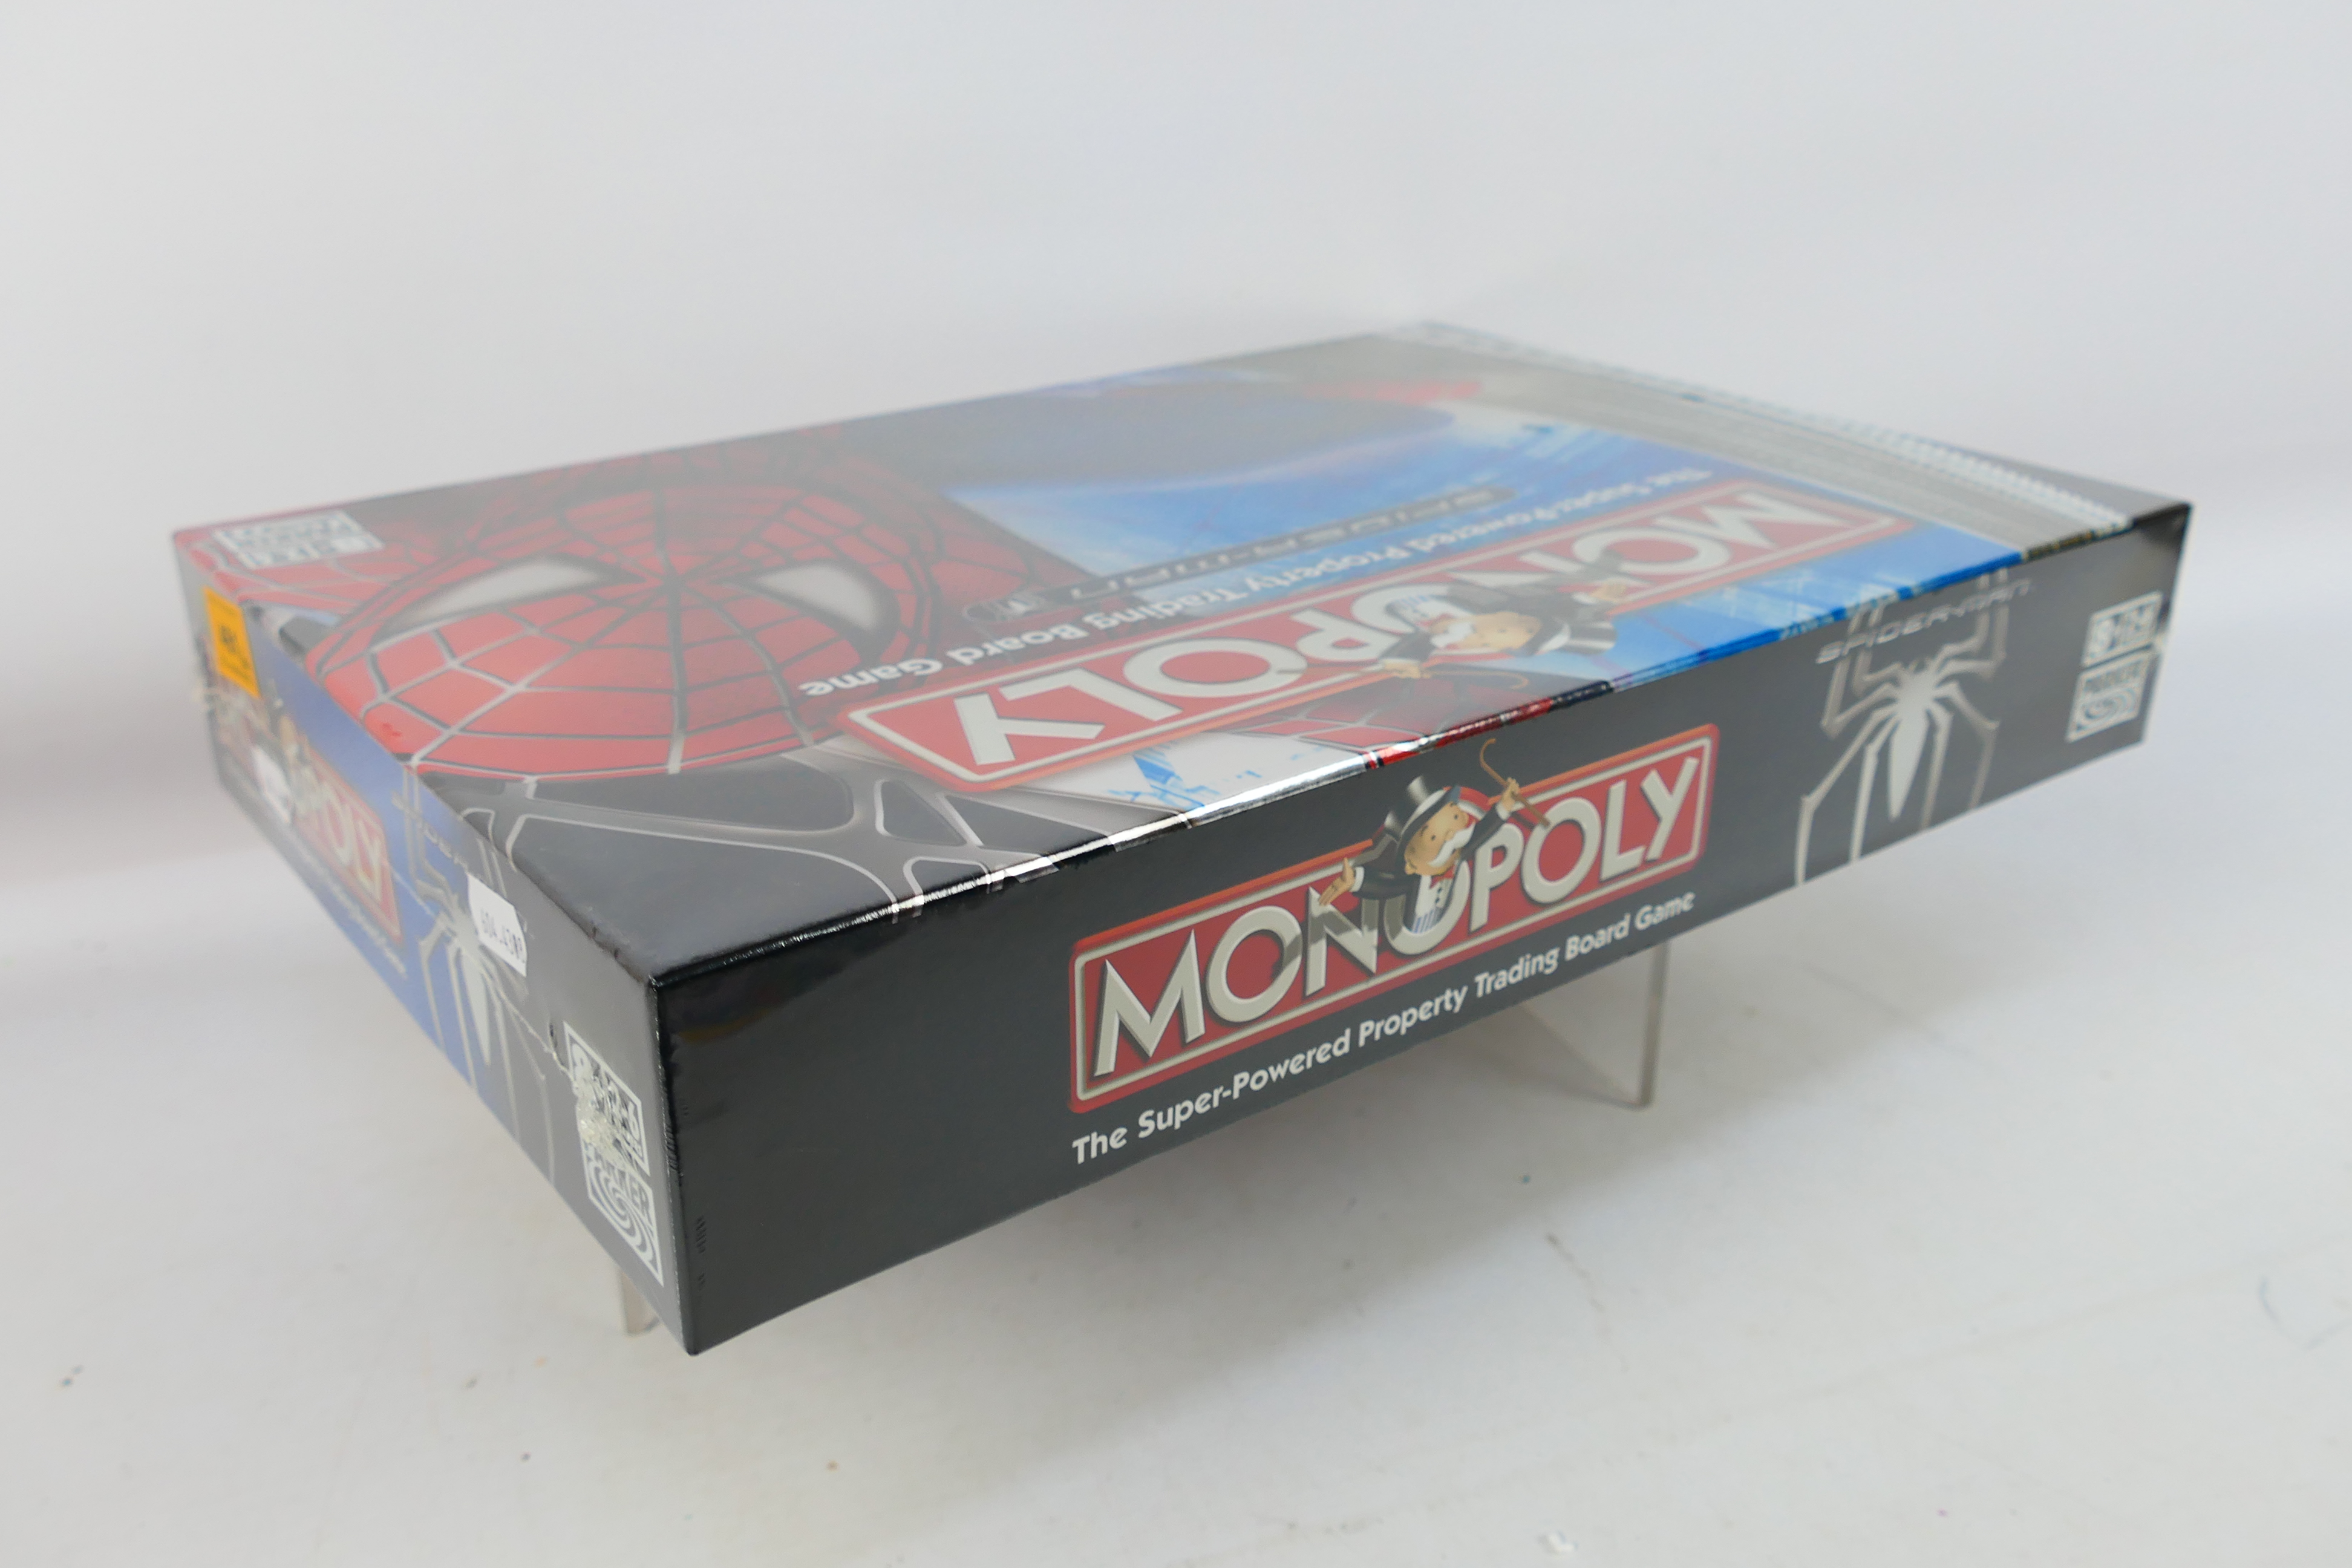 Hasbro - Monopoly - An unopened Spider-m - Image 3 of 3